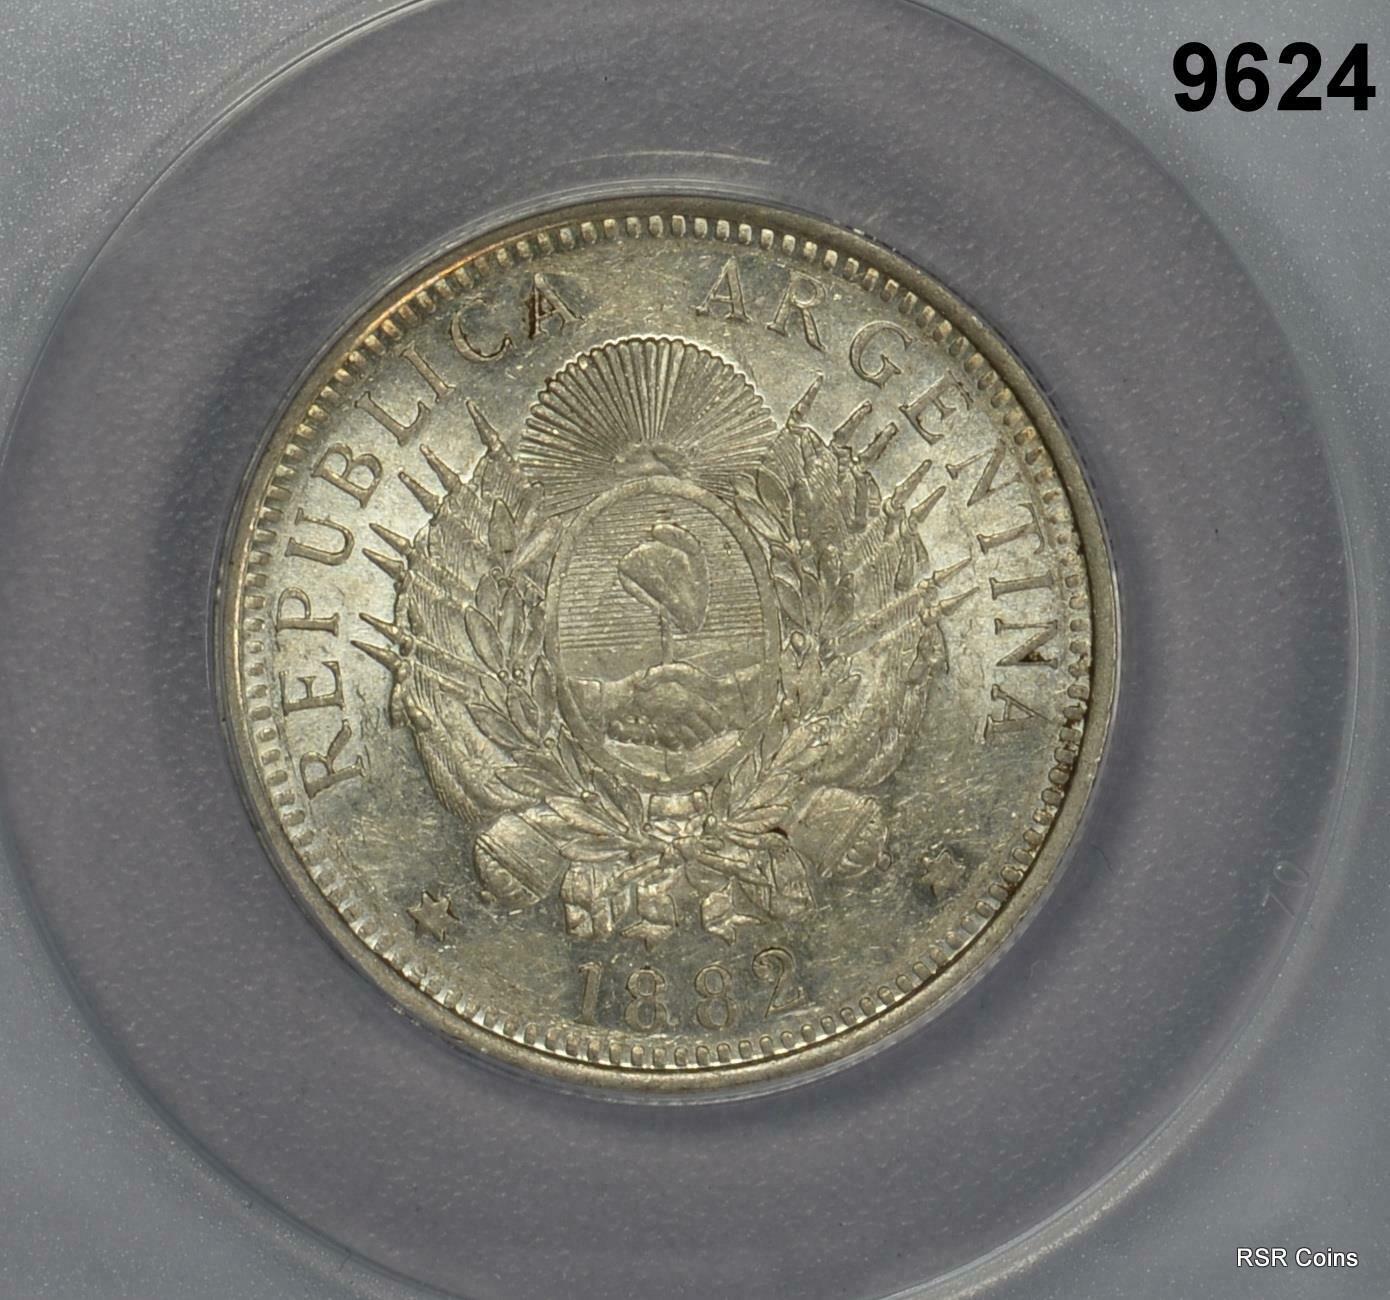 1882 ARGENTINA 50 CENTAVOS ANACS CERTIFIED AU55 CLEANED #9624